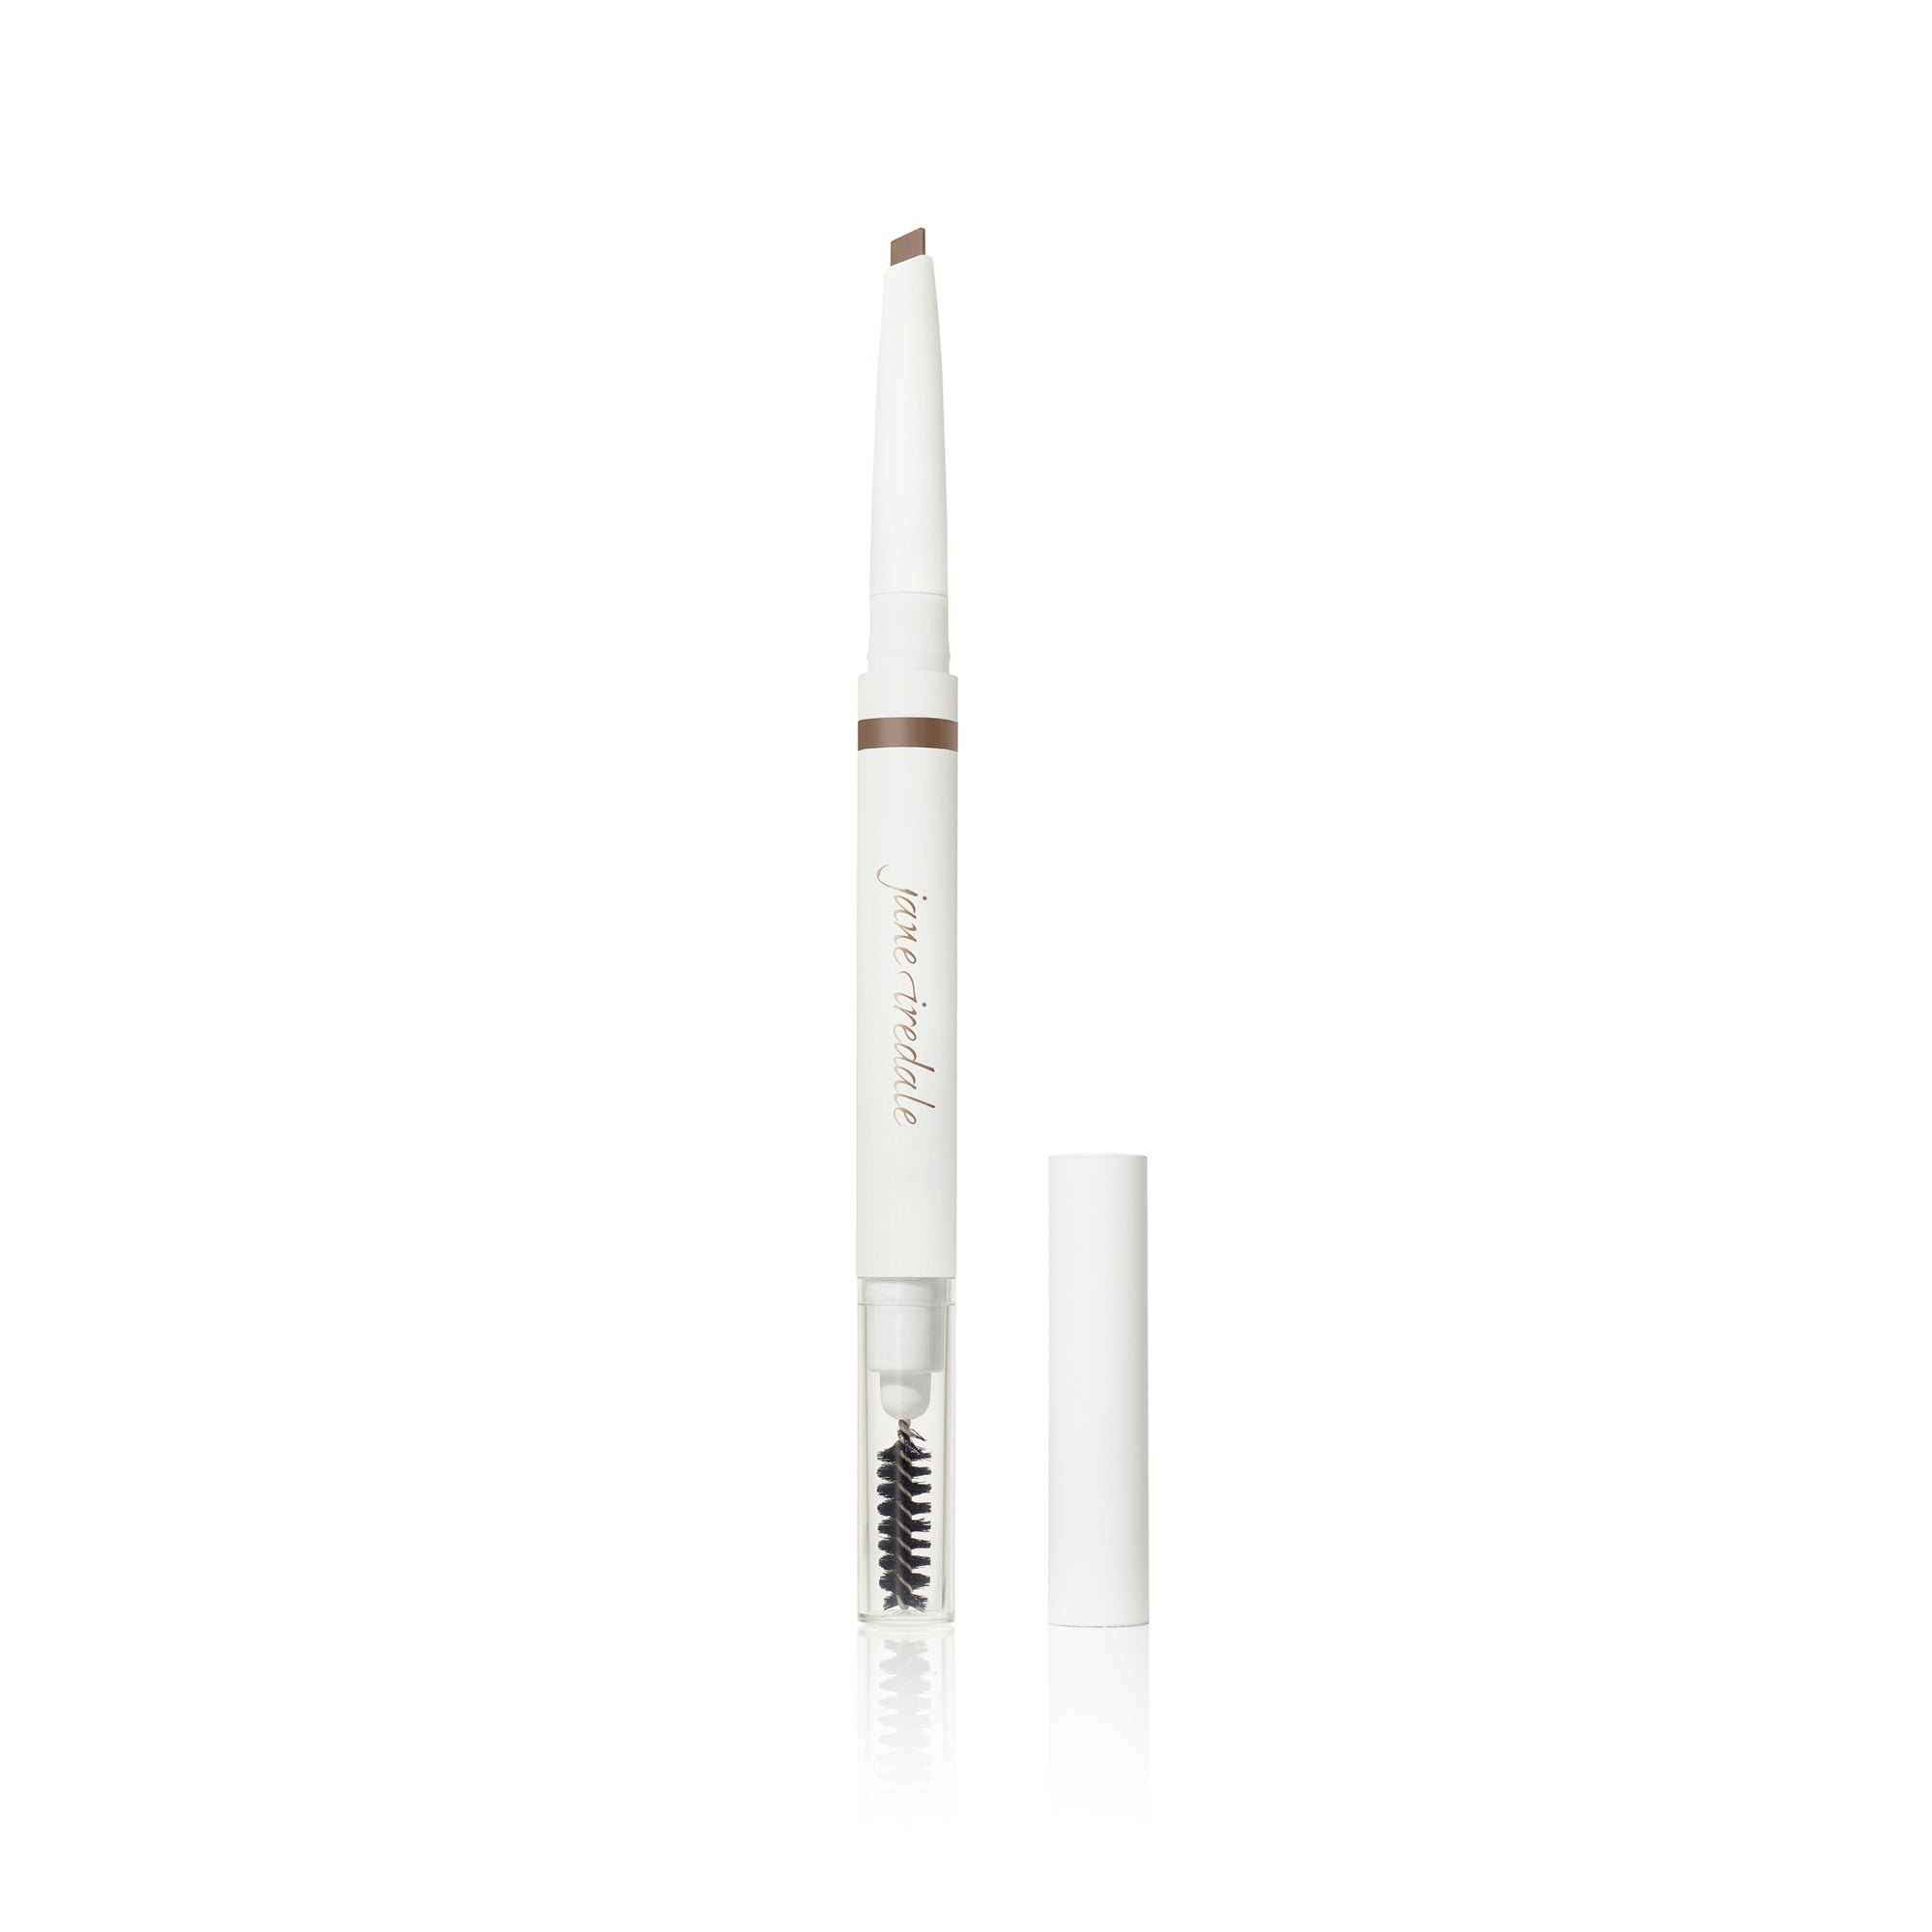 Jane Iredale PureBrow Shaping Pencil / Neutral Blonde